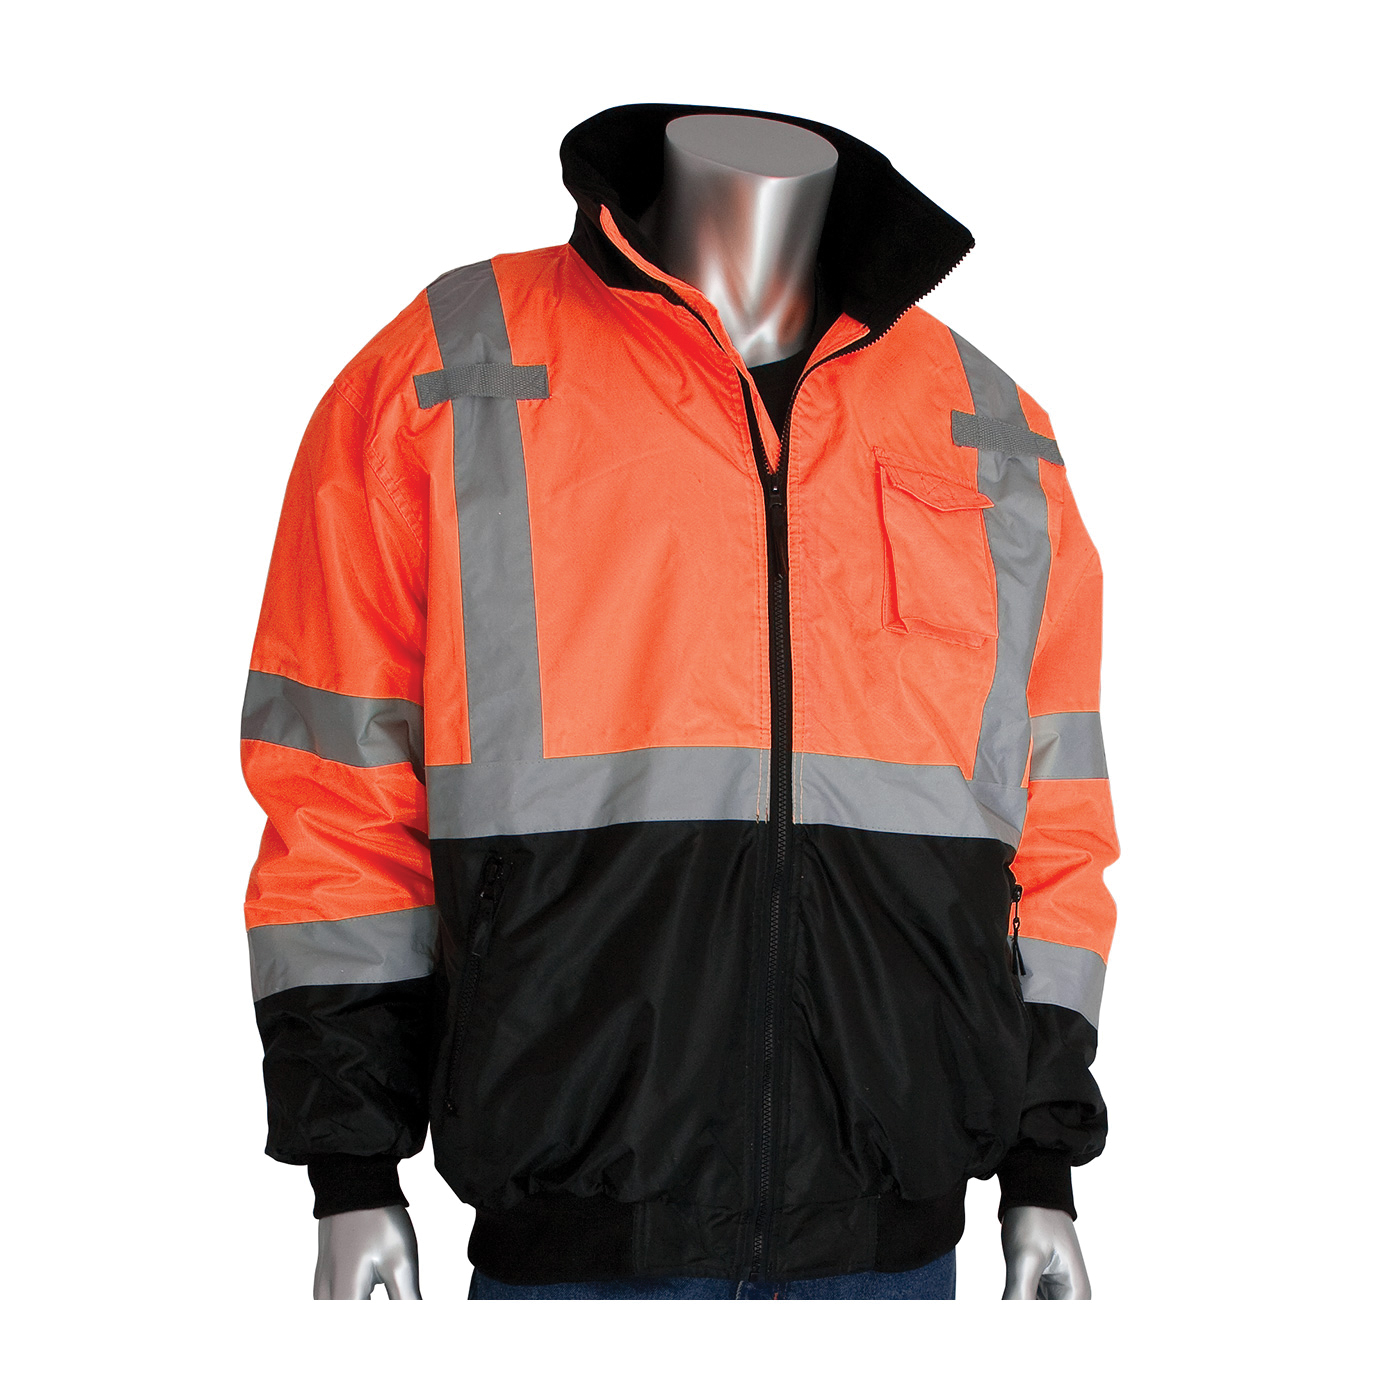 PIP® 333-1766-OR/2X Bomber Jacket With Zip-Out Fleece Liner, Hi-Viz Orange, Polyester, 63 in Chest, Resists: Water, Specifications Met: ANSI 107 Class 3 Type R